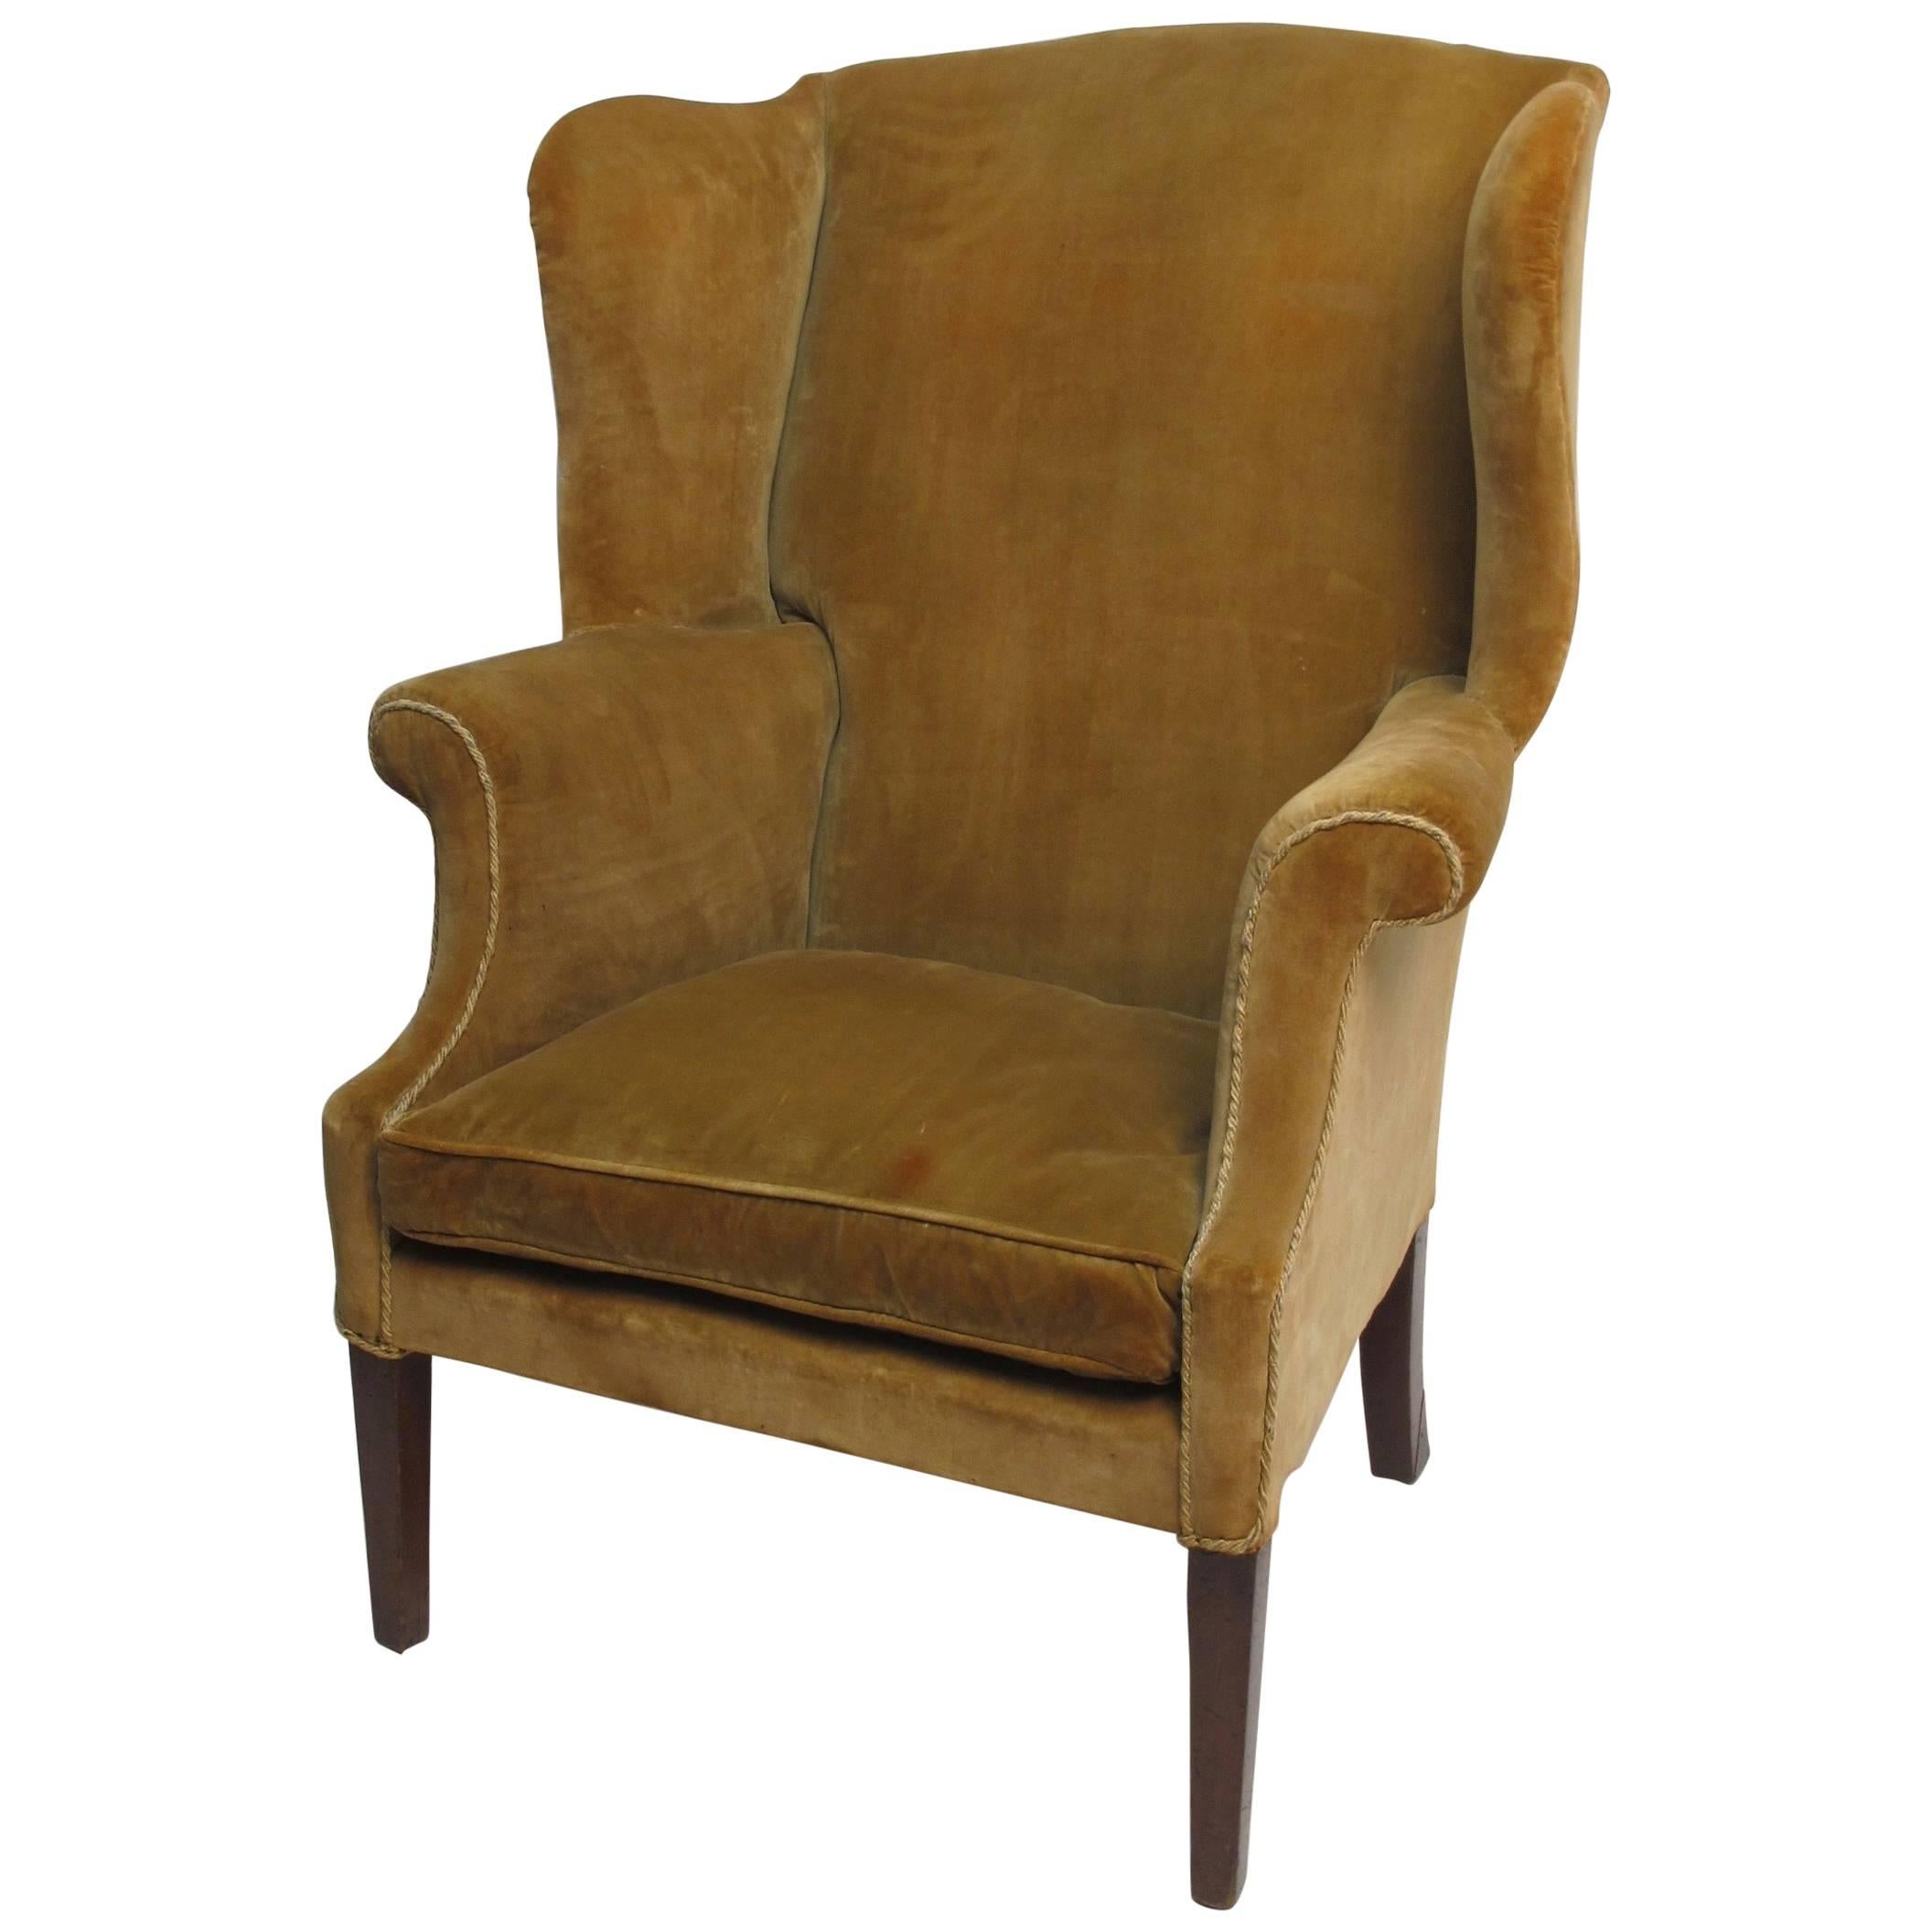 18th Century American Wingback Chair